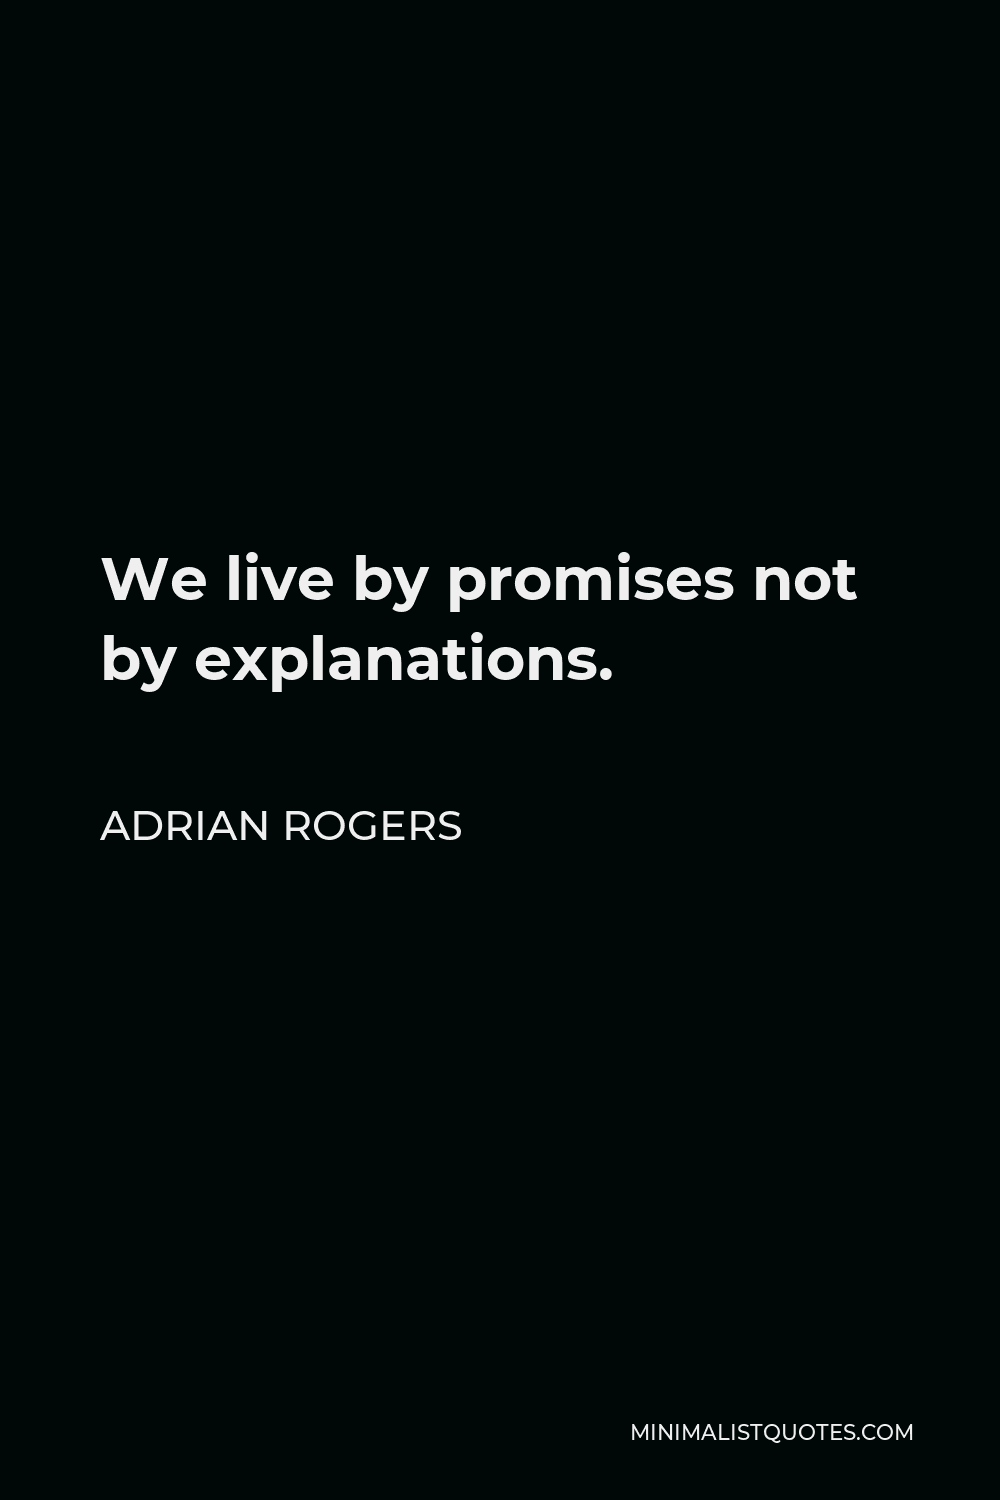 Adrian Rogers Quote - We live by promises not by explanations.